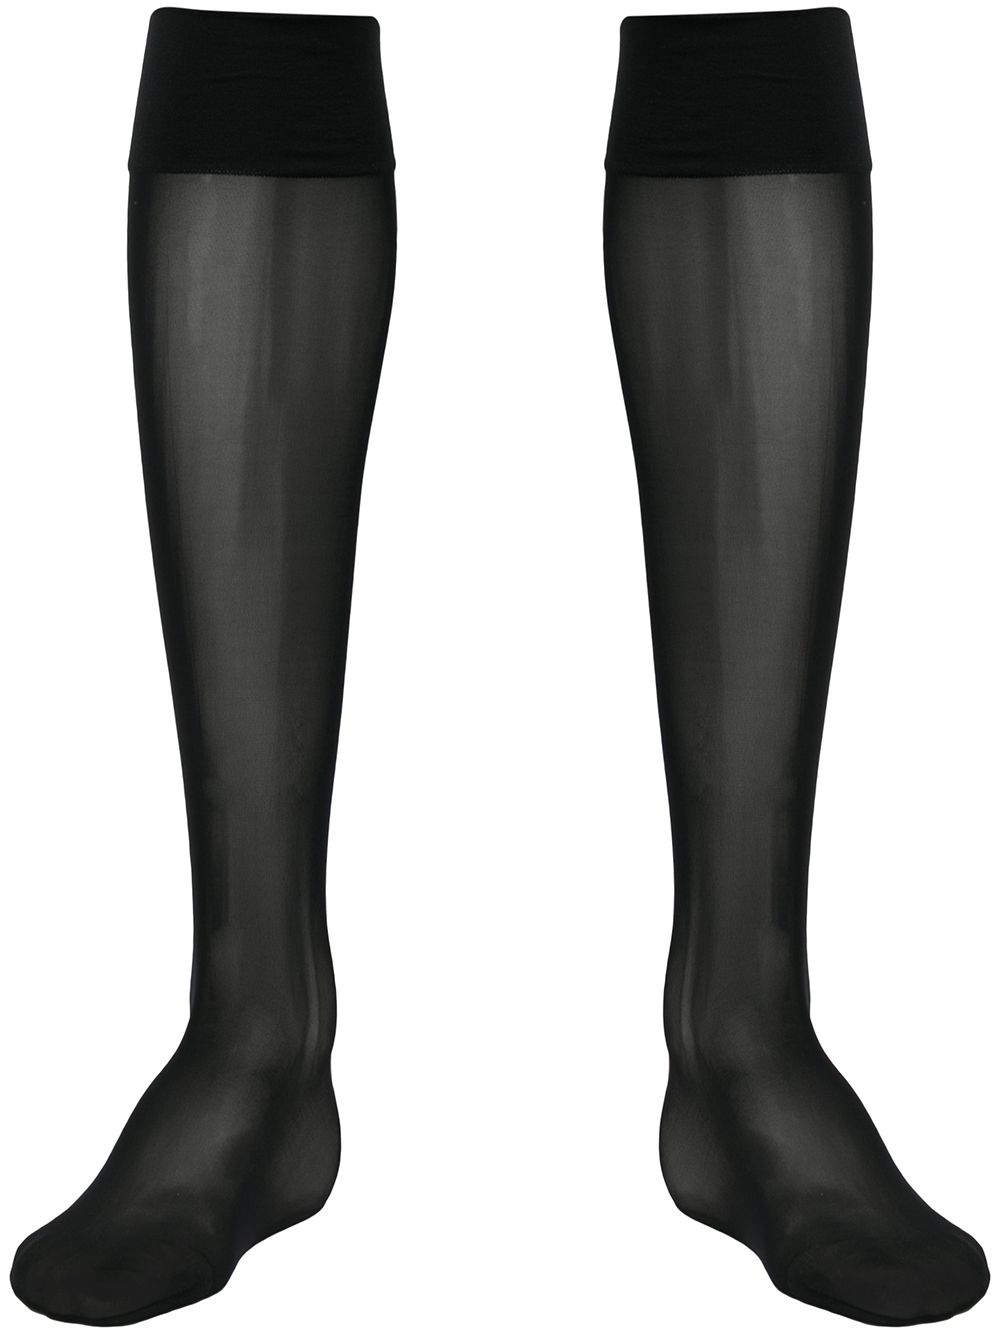 Wolford Individual 10 stockings - Black von Wolford